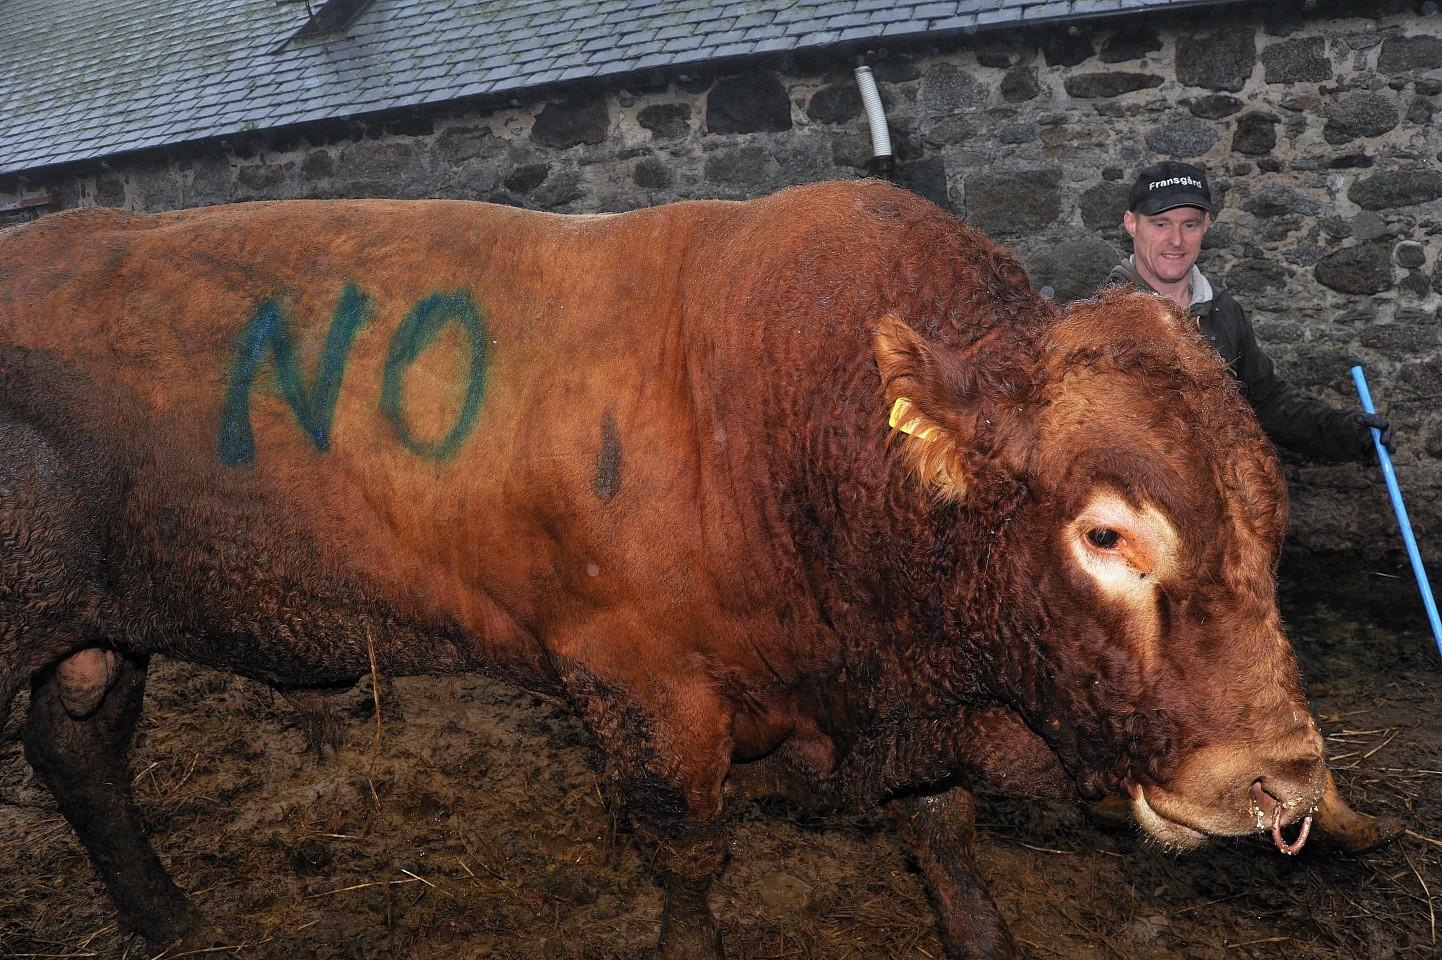 Many farmers including Allan Moore resorted to making live no signs with their animals